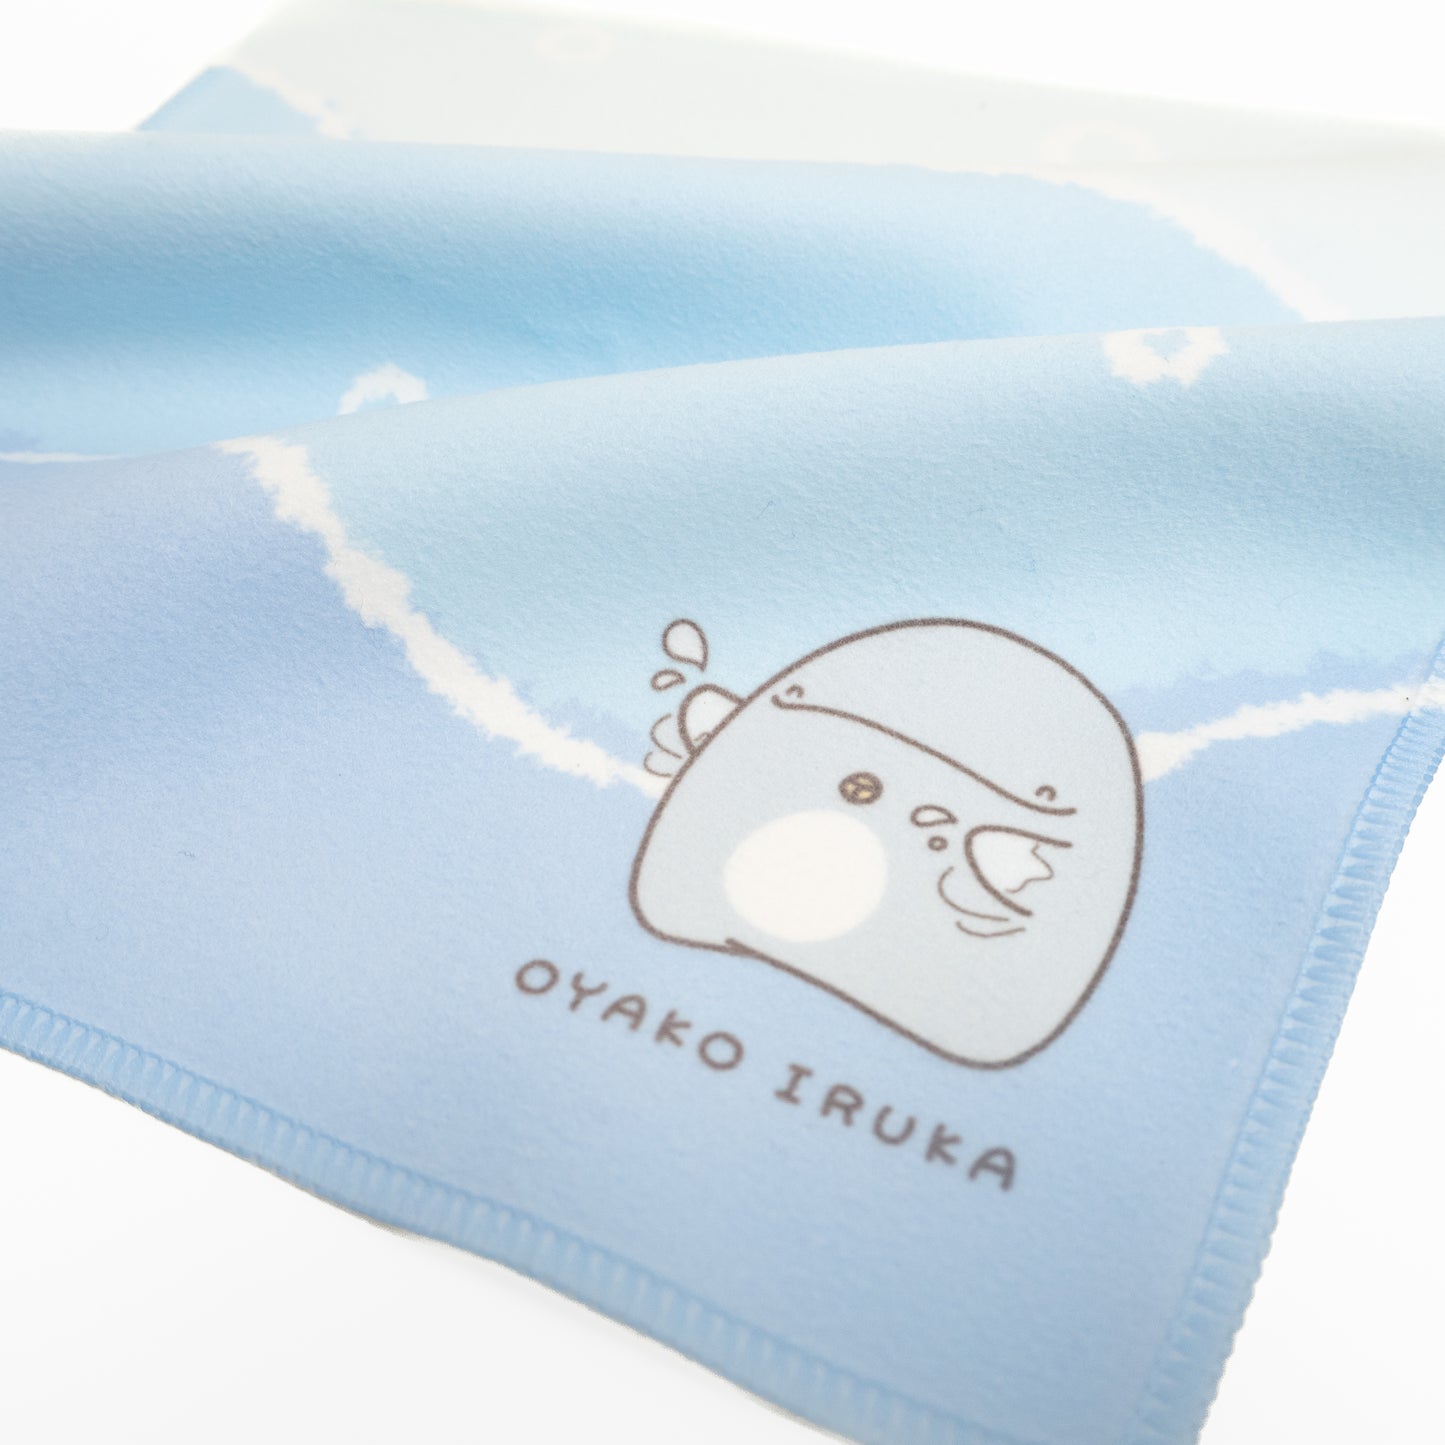 [Parent and child dolphin] Handkerchief towel